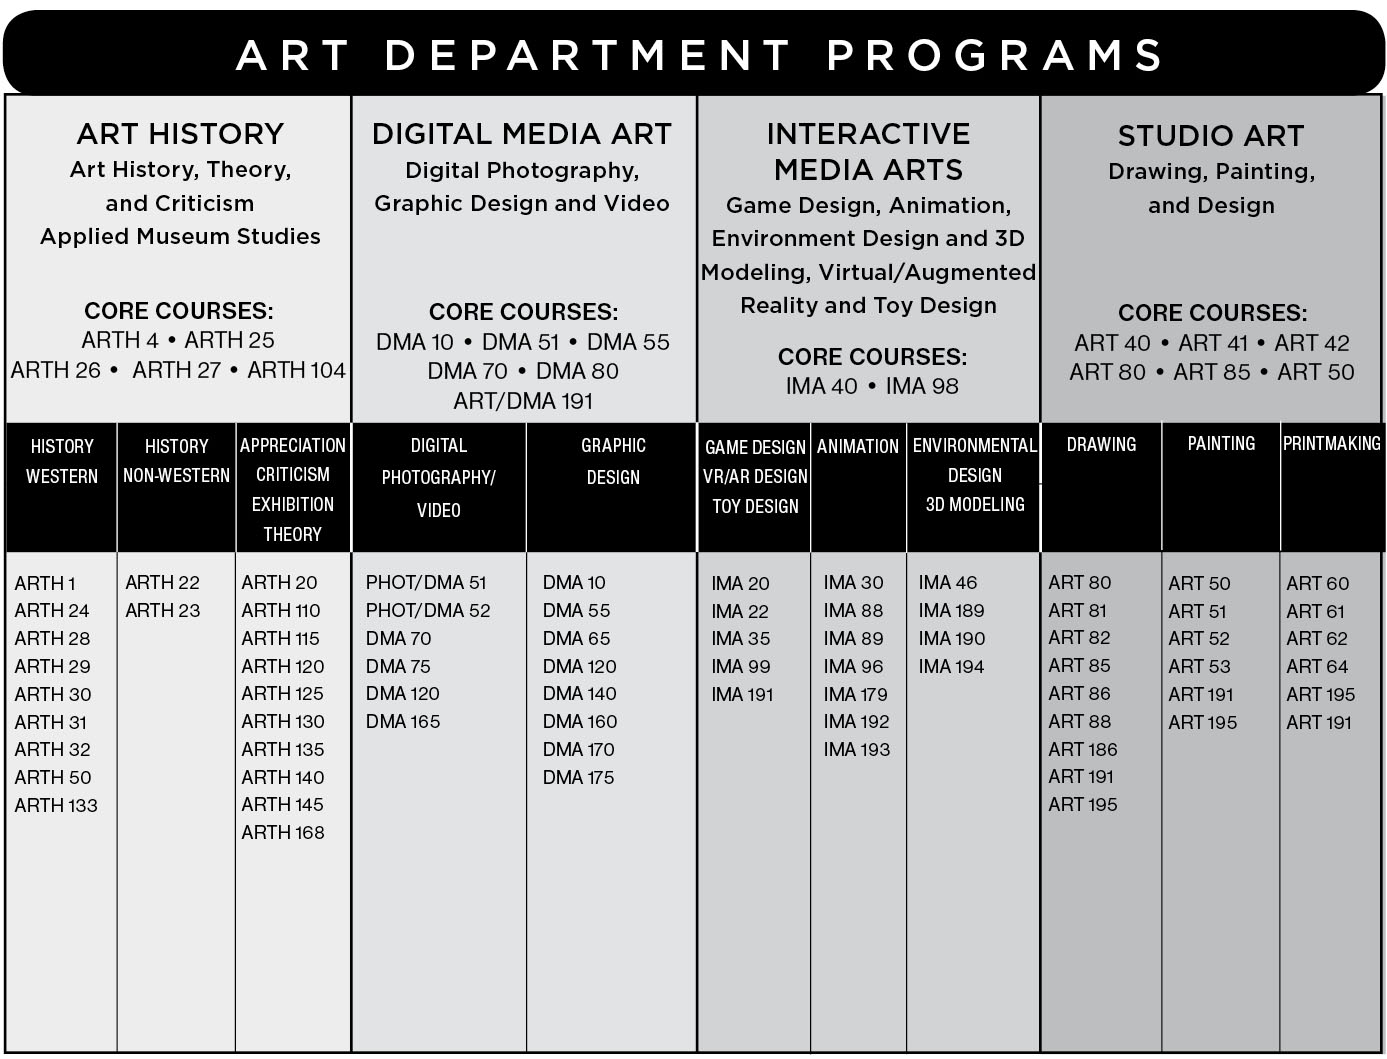 Graphical chart showing the programs and courses in the IVC art department.